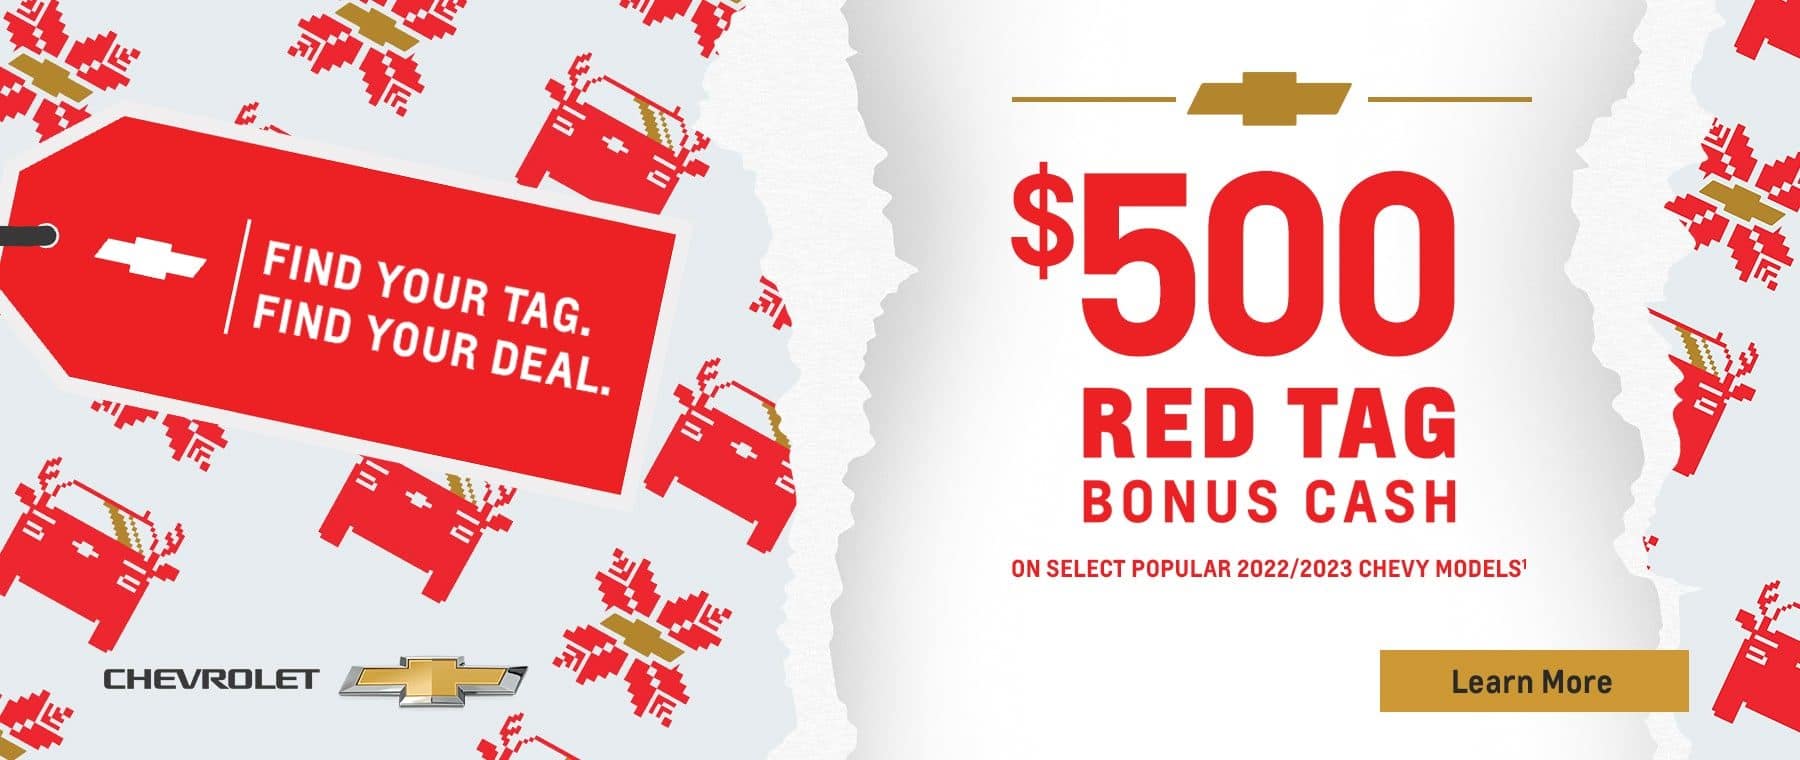 $500 Red Tag Bonus Cash on select popular 2022/2023 Chevy models. That's on top of most other offers.